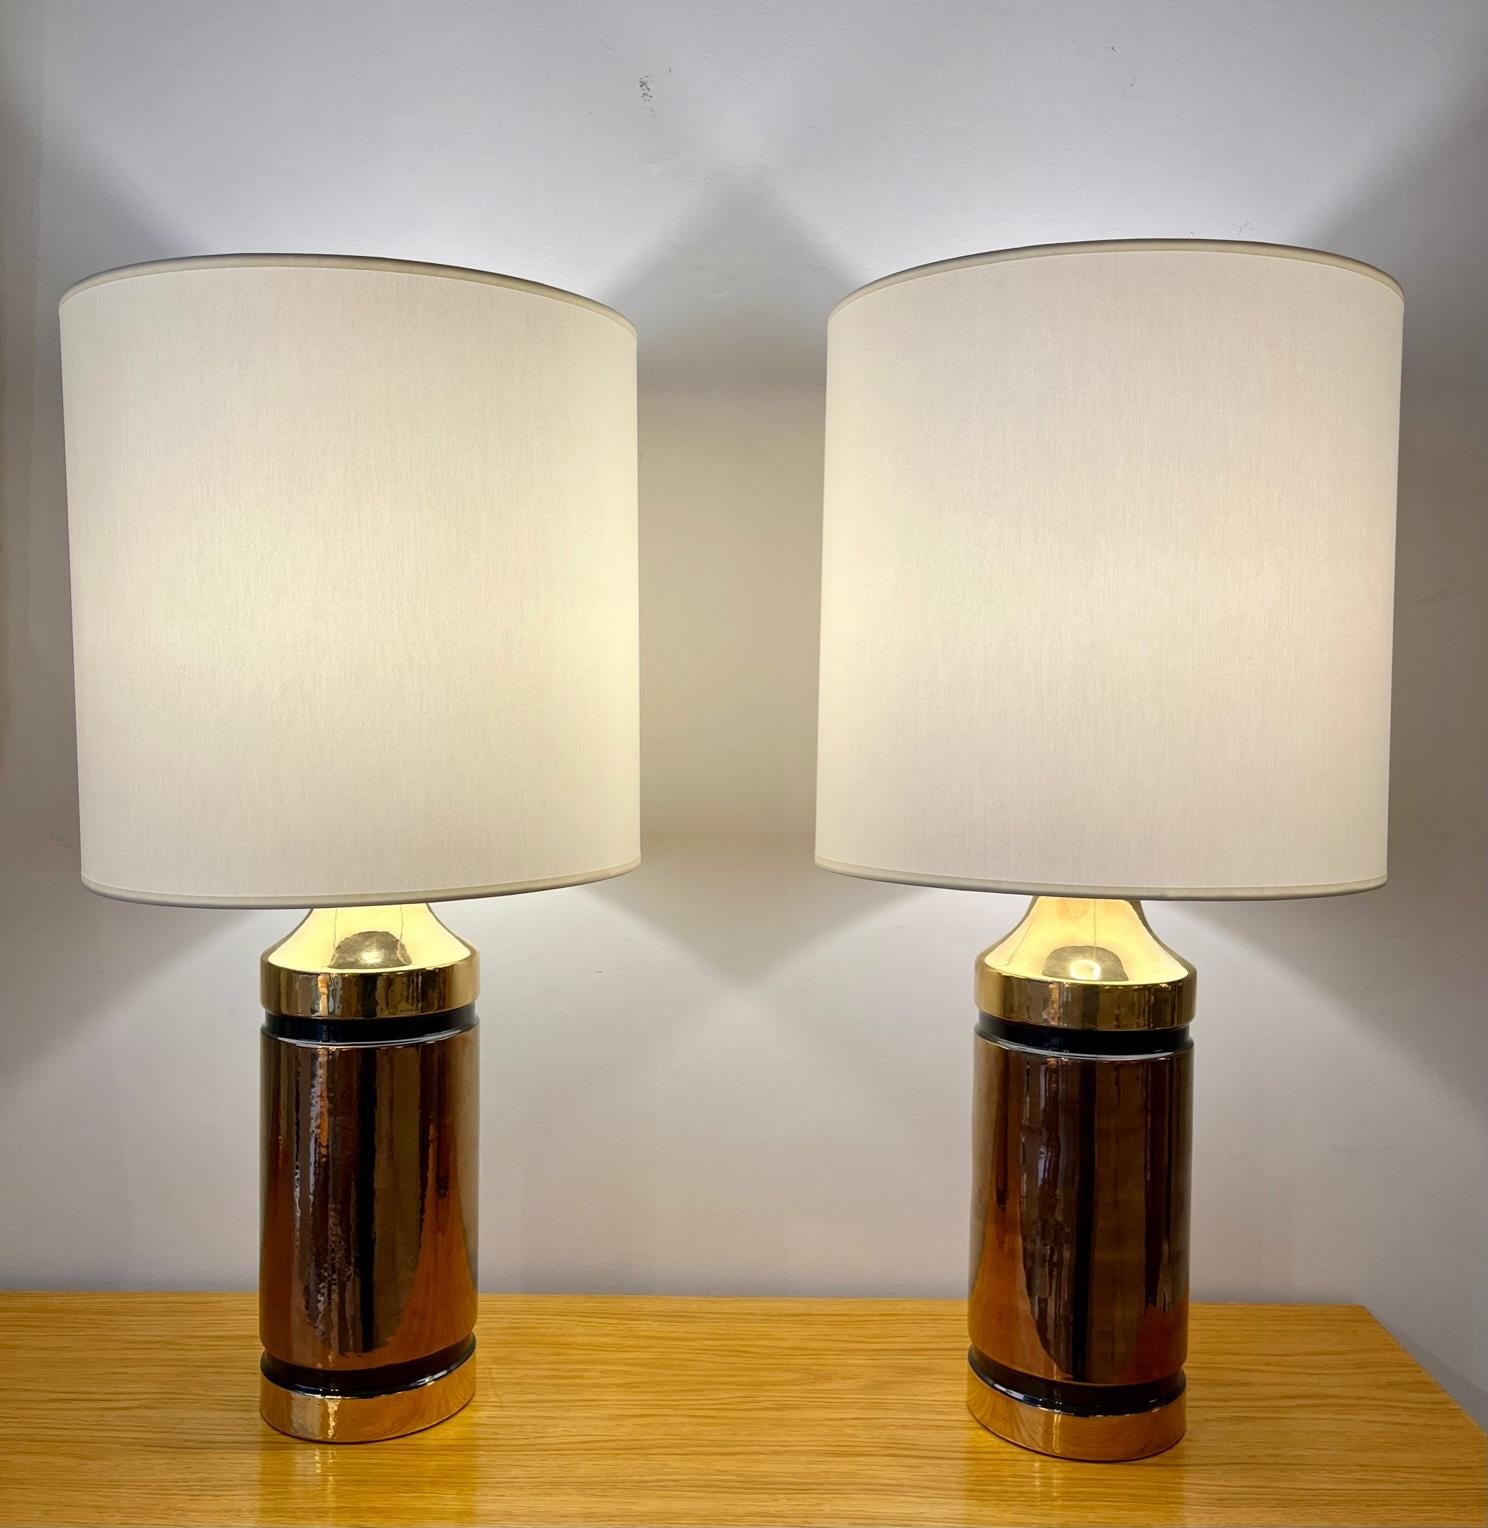 Pair of  ceramic lamps by Bitossi

Pair of glazed ceramic  lamps in shades of gold and copper.
By Bitossi (manufacturer) for Miranda ( Swedish retailer ) 
Italy, 1960

Dimension :

Height ( total - with lampshade ) : 27,55 inches
Height ( ceramic +